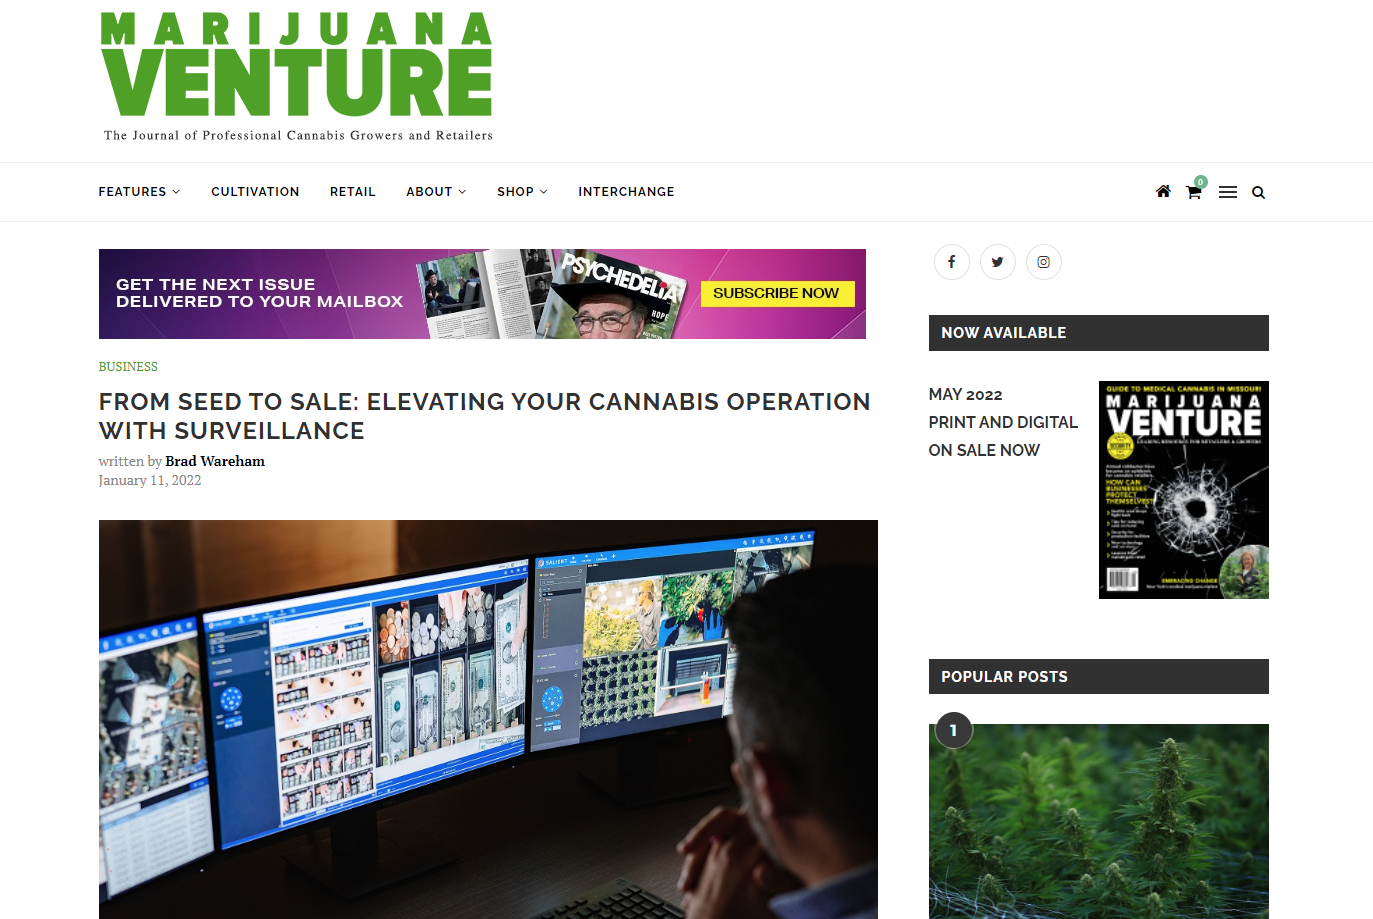 FROM SEED TO SALE: ELEVATING YOUR CANNABIS OPERATION WITH SURVEILLANCE